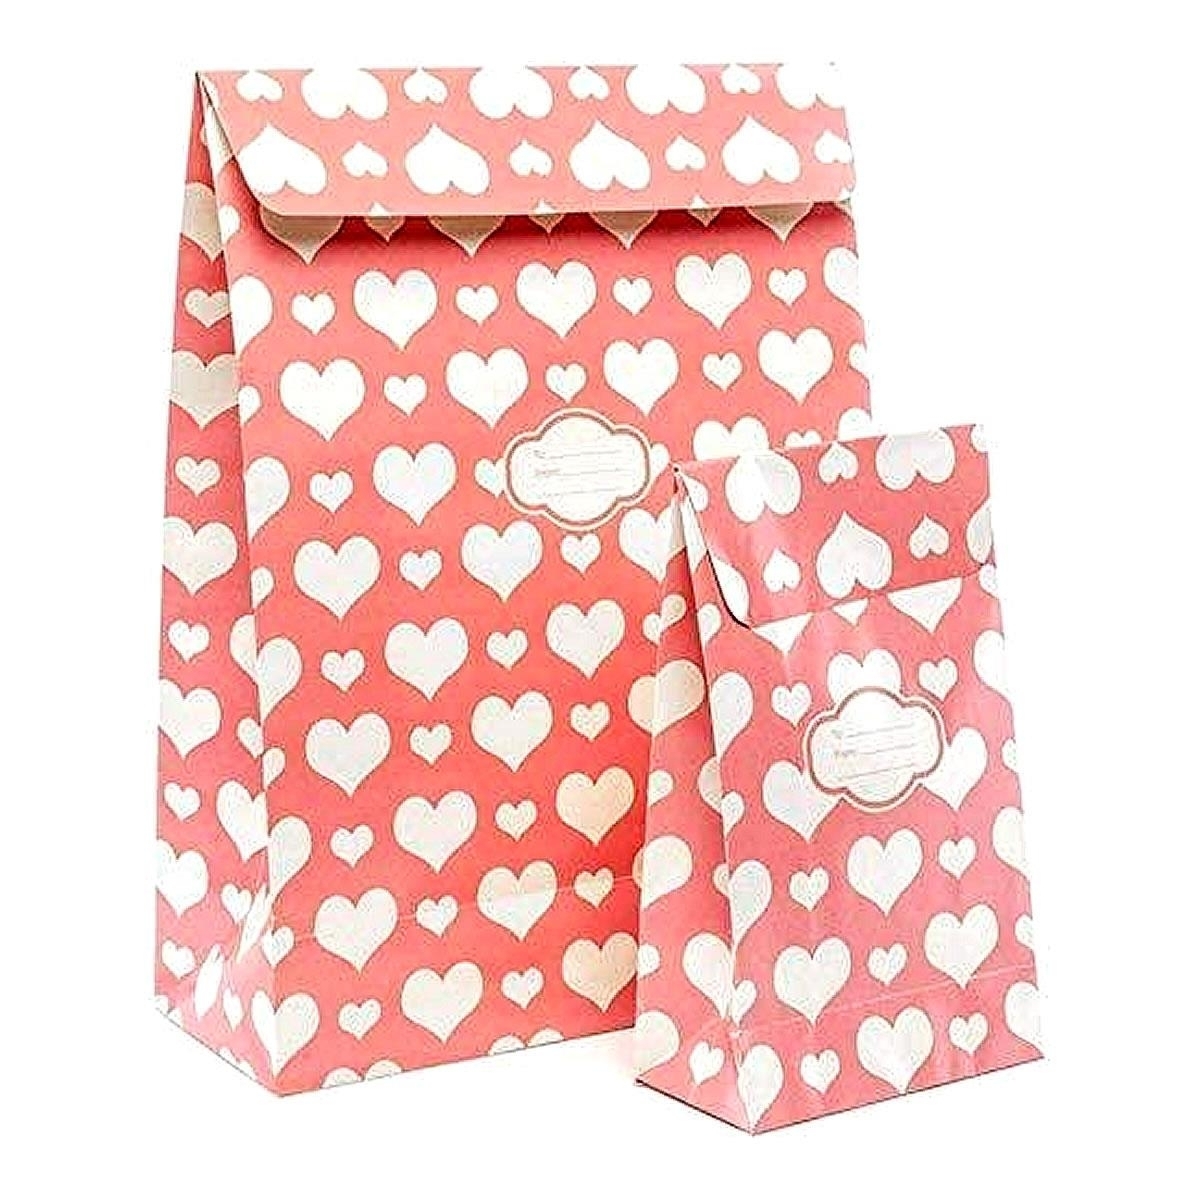 Pressie Pouch Peel & Seal Gift Bag Pink Hearts 12pk Large No-Wrap Present